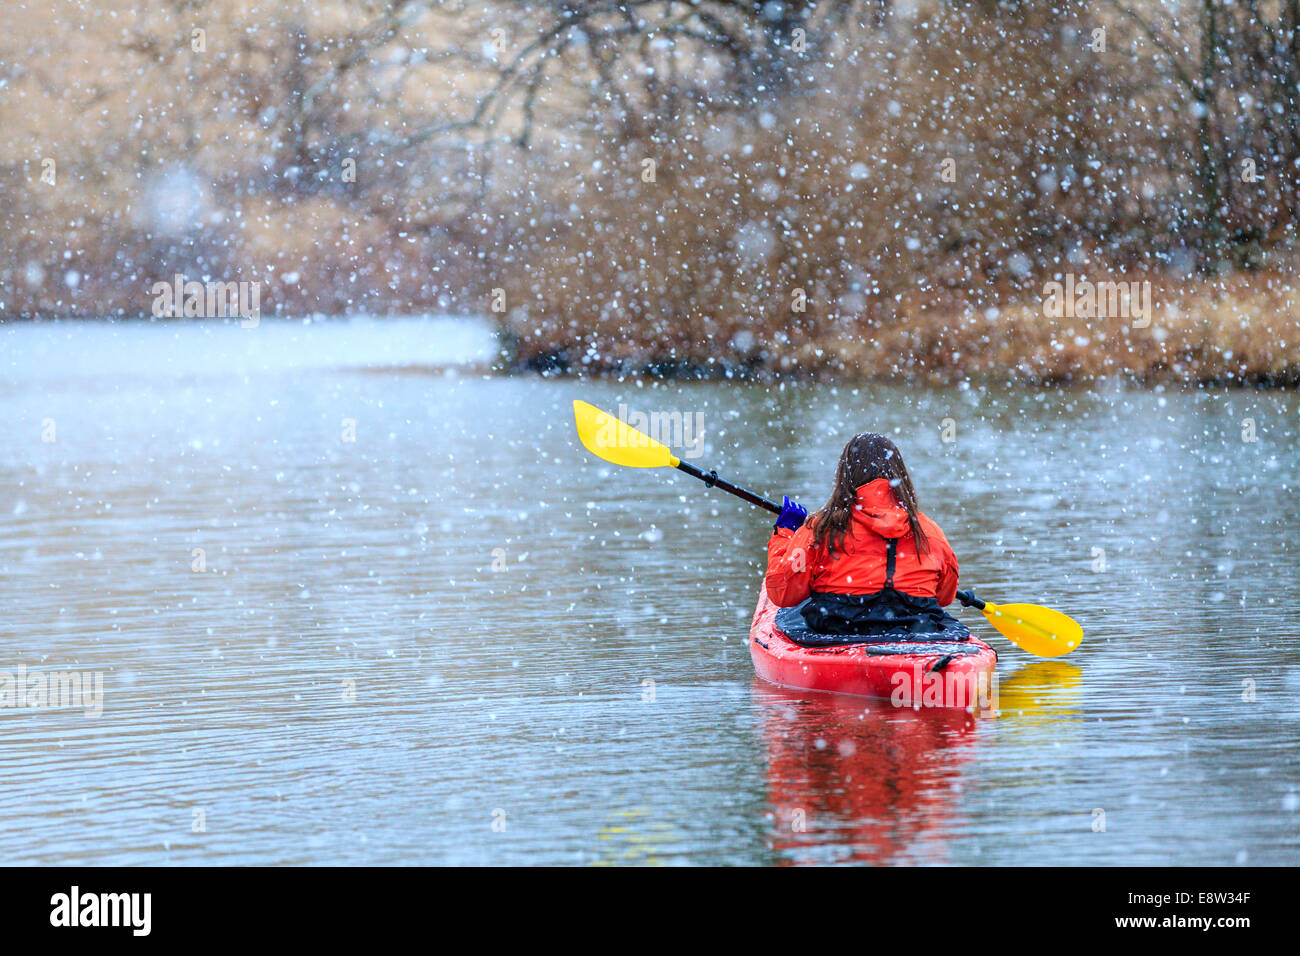 Woman is kayaking on a lake under heavy snow Stock Photo